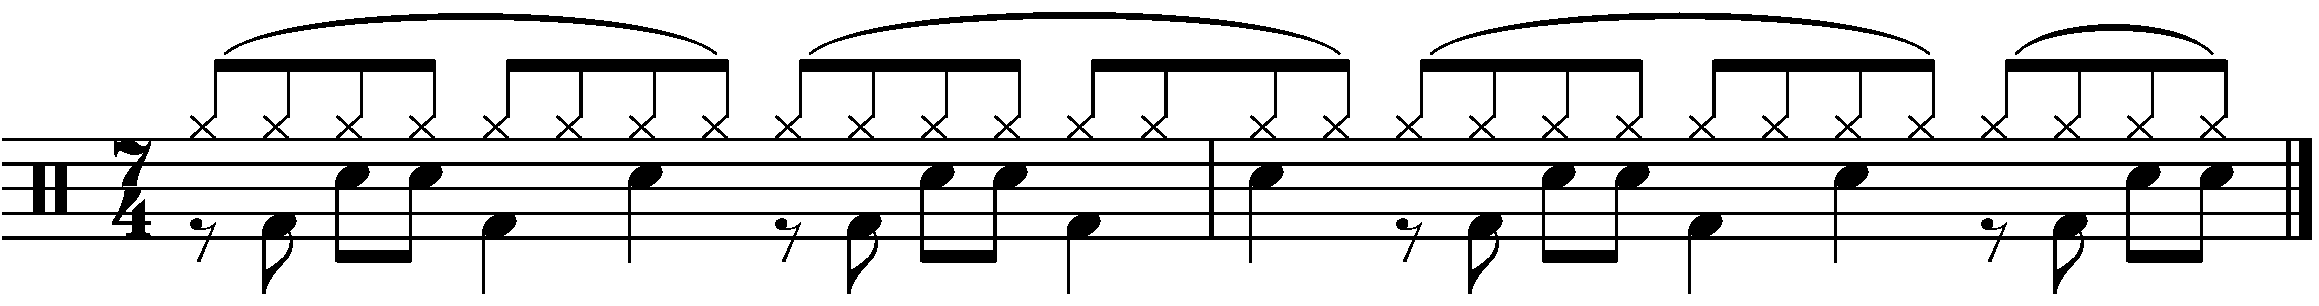 A four bar polymetered phrase